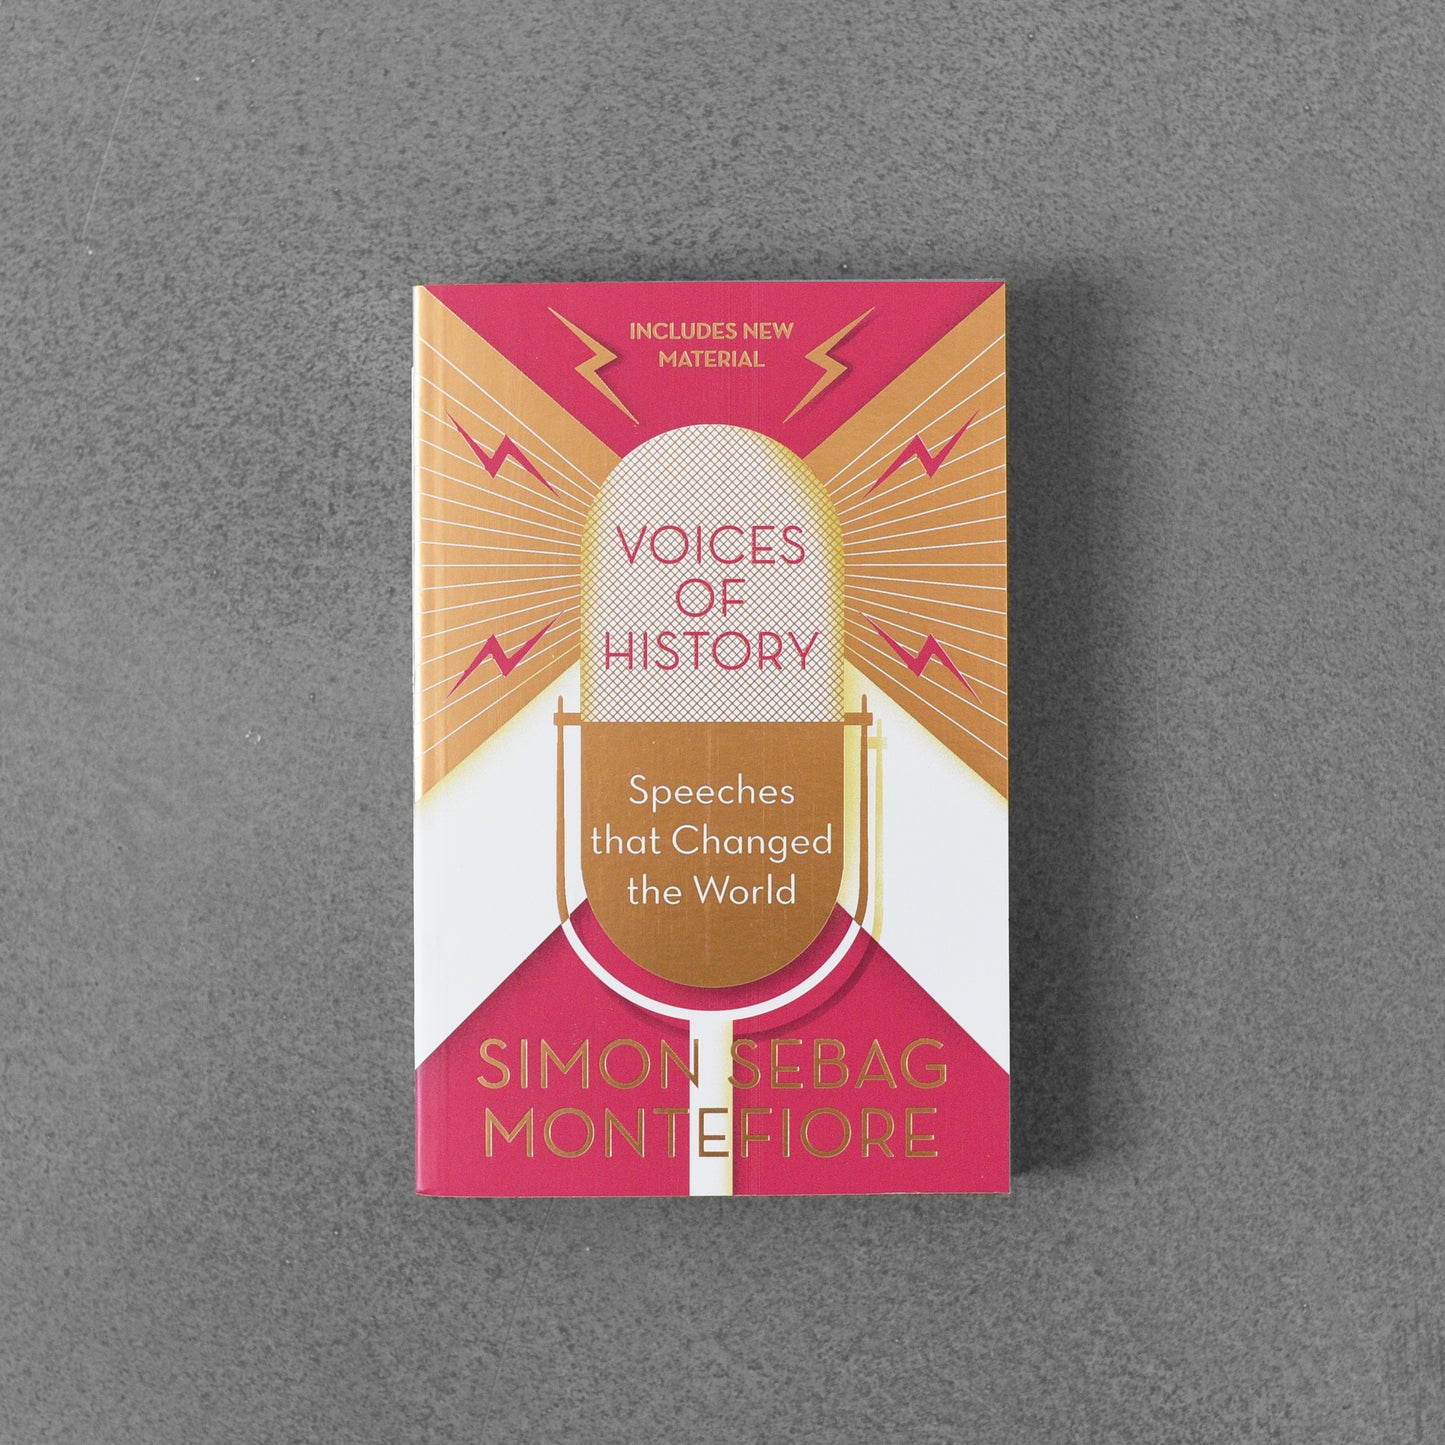 Voices of History: Speeches that Changed the World - Simon Sebag Montefiore